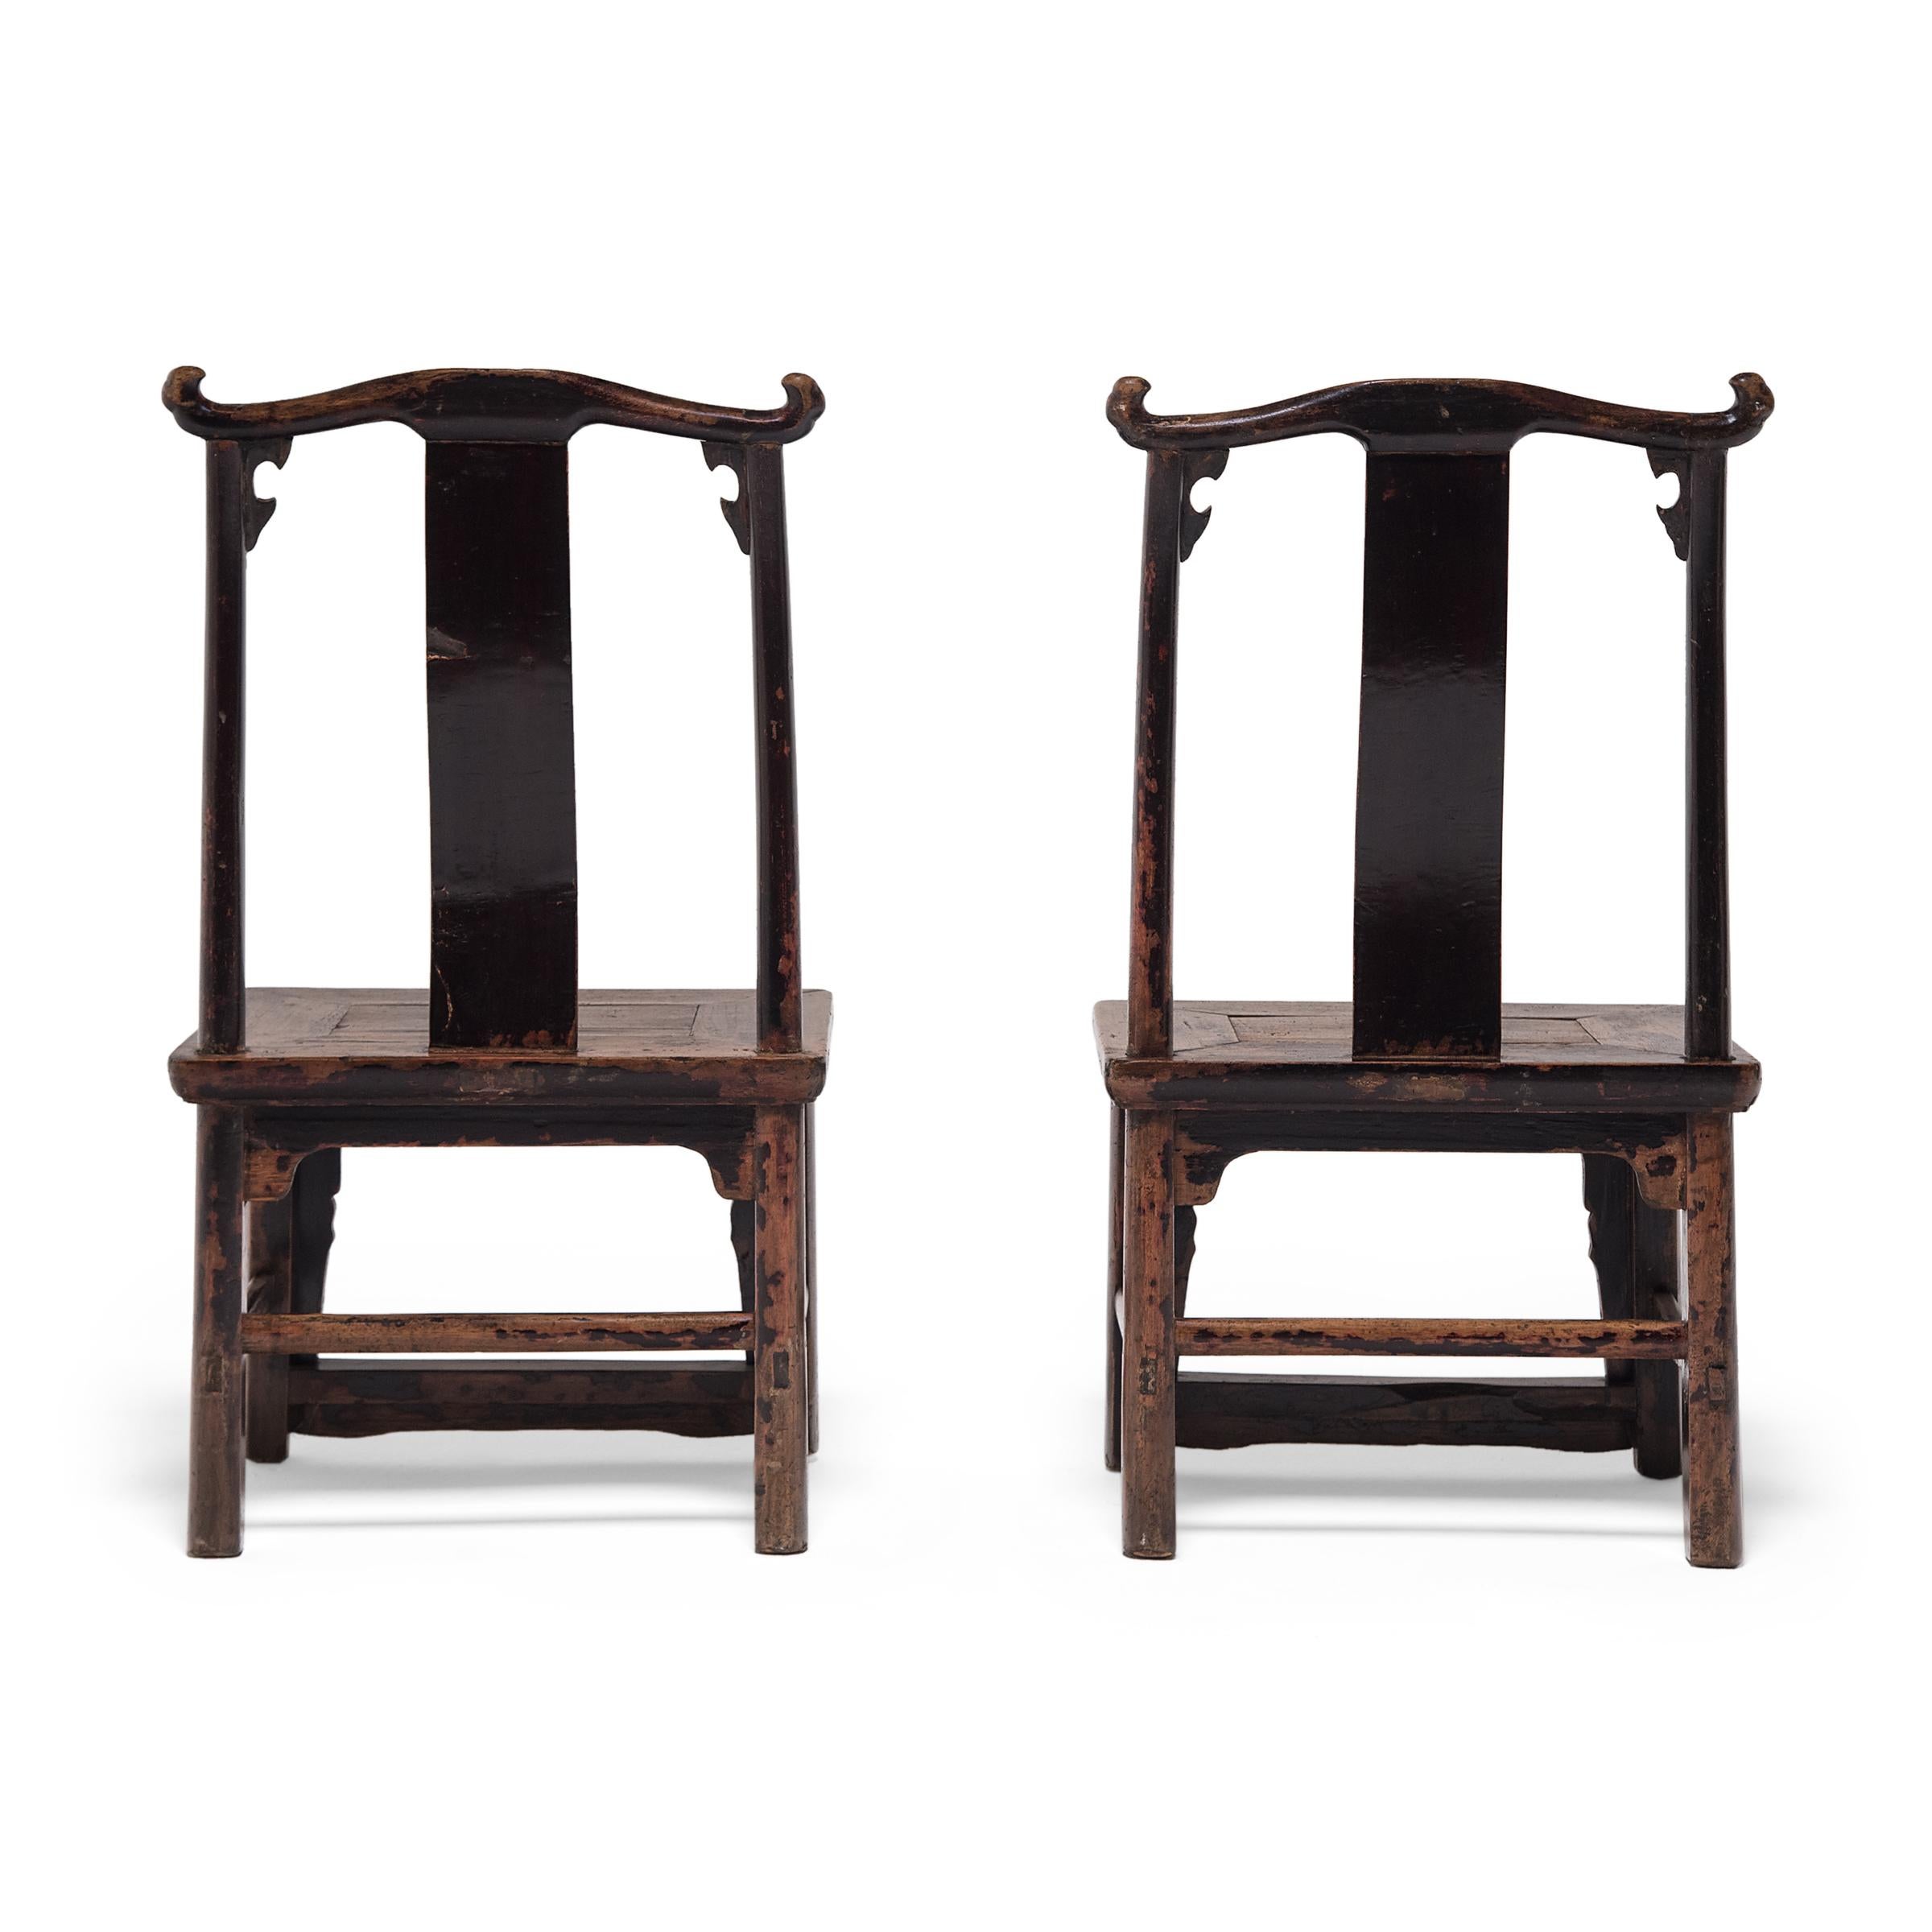 Qing Pair of Chinese Yokeback Children's Chairs, c. 1850 For Sale